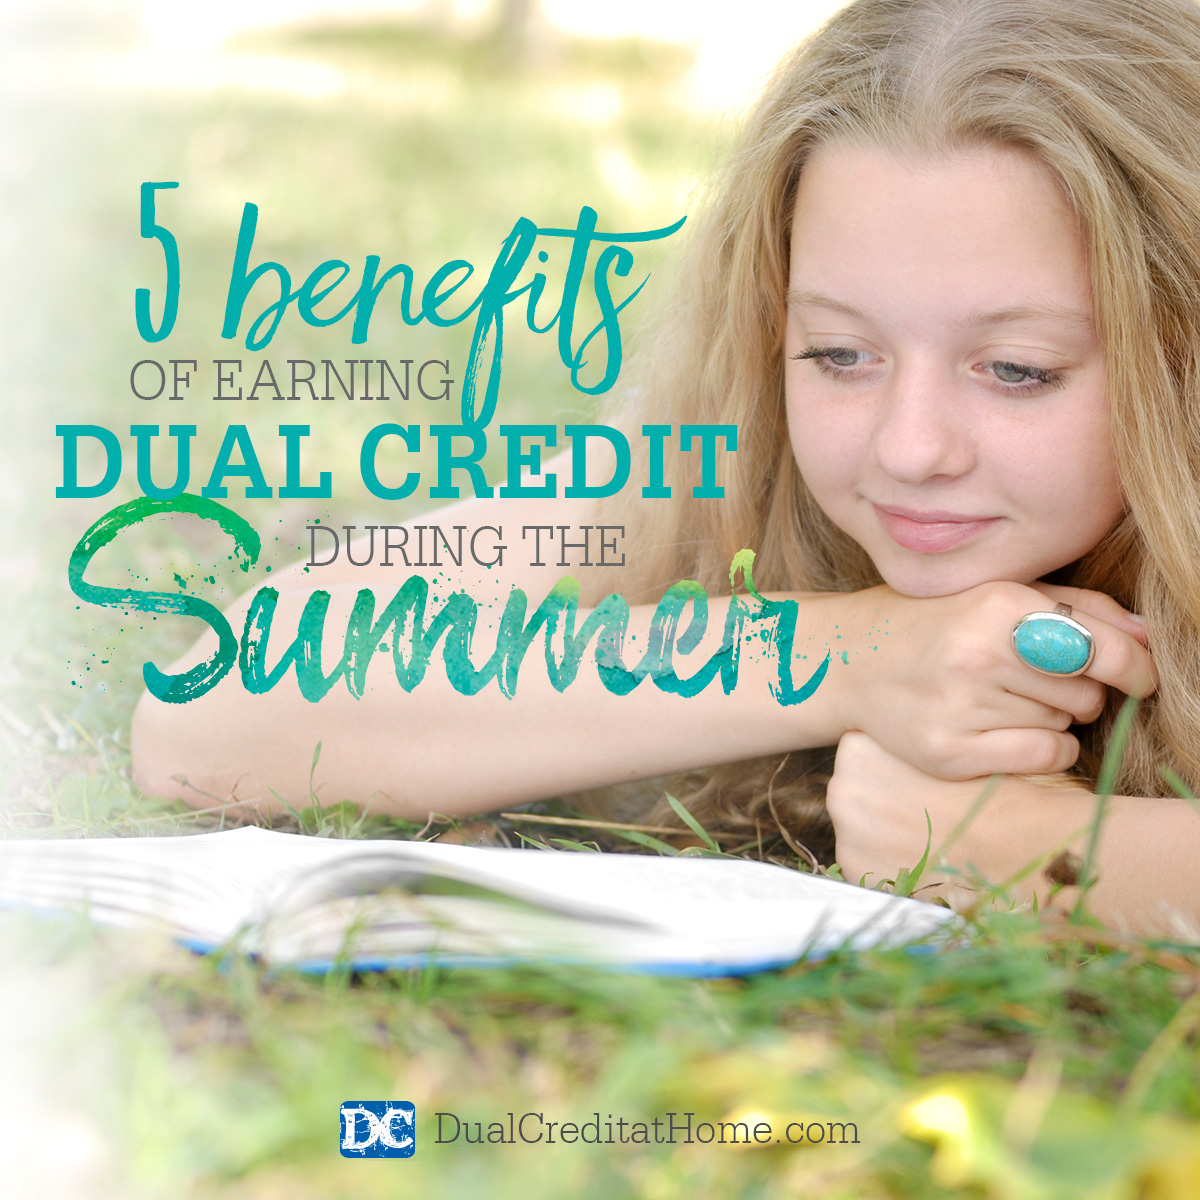 5 Benefits of Earning Dual Credit During the Summer